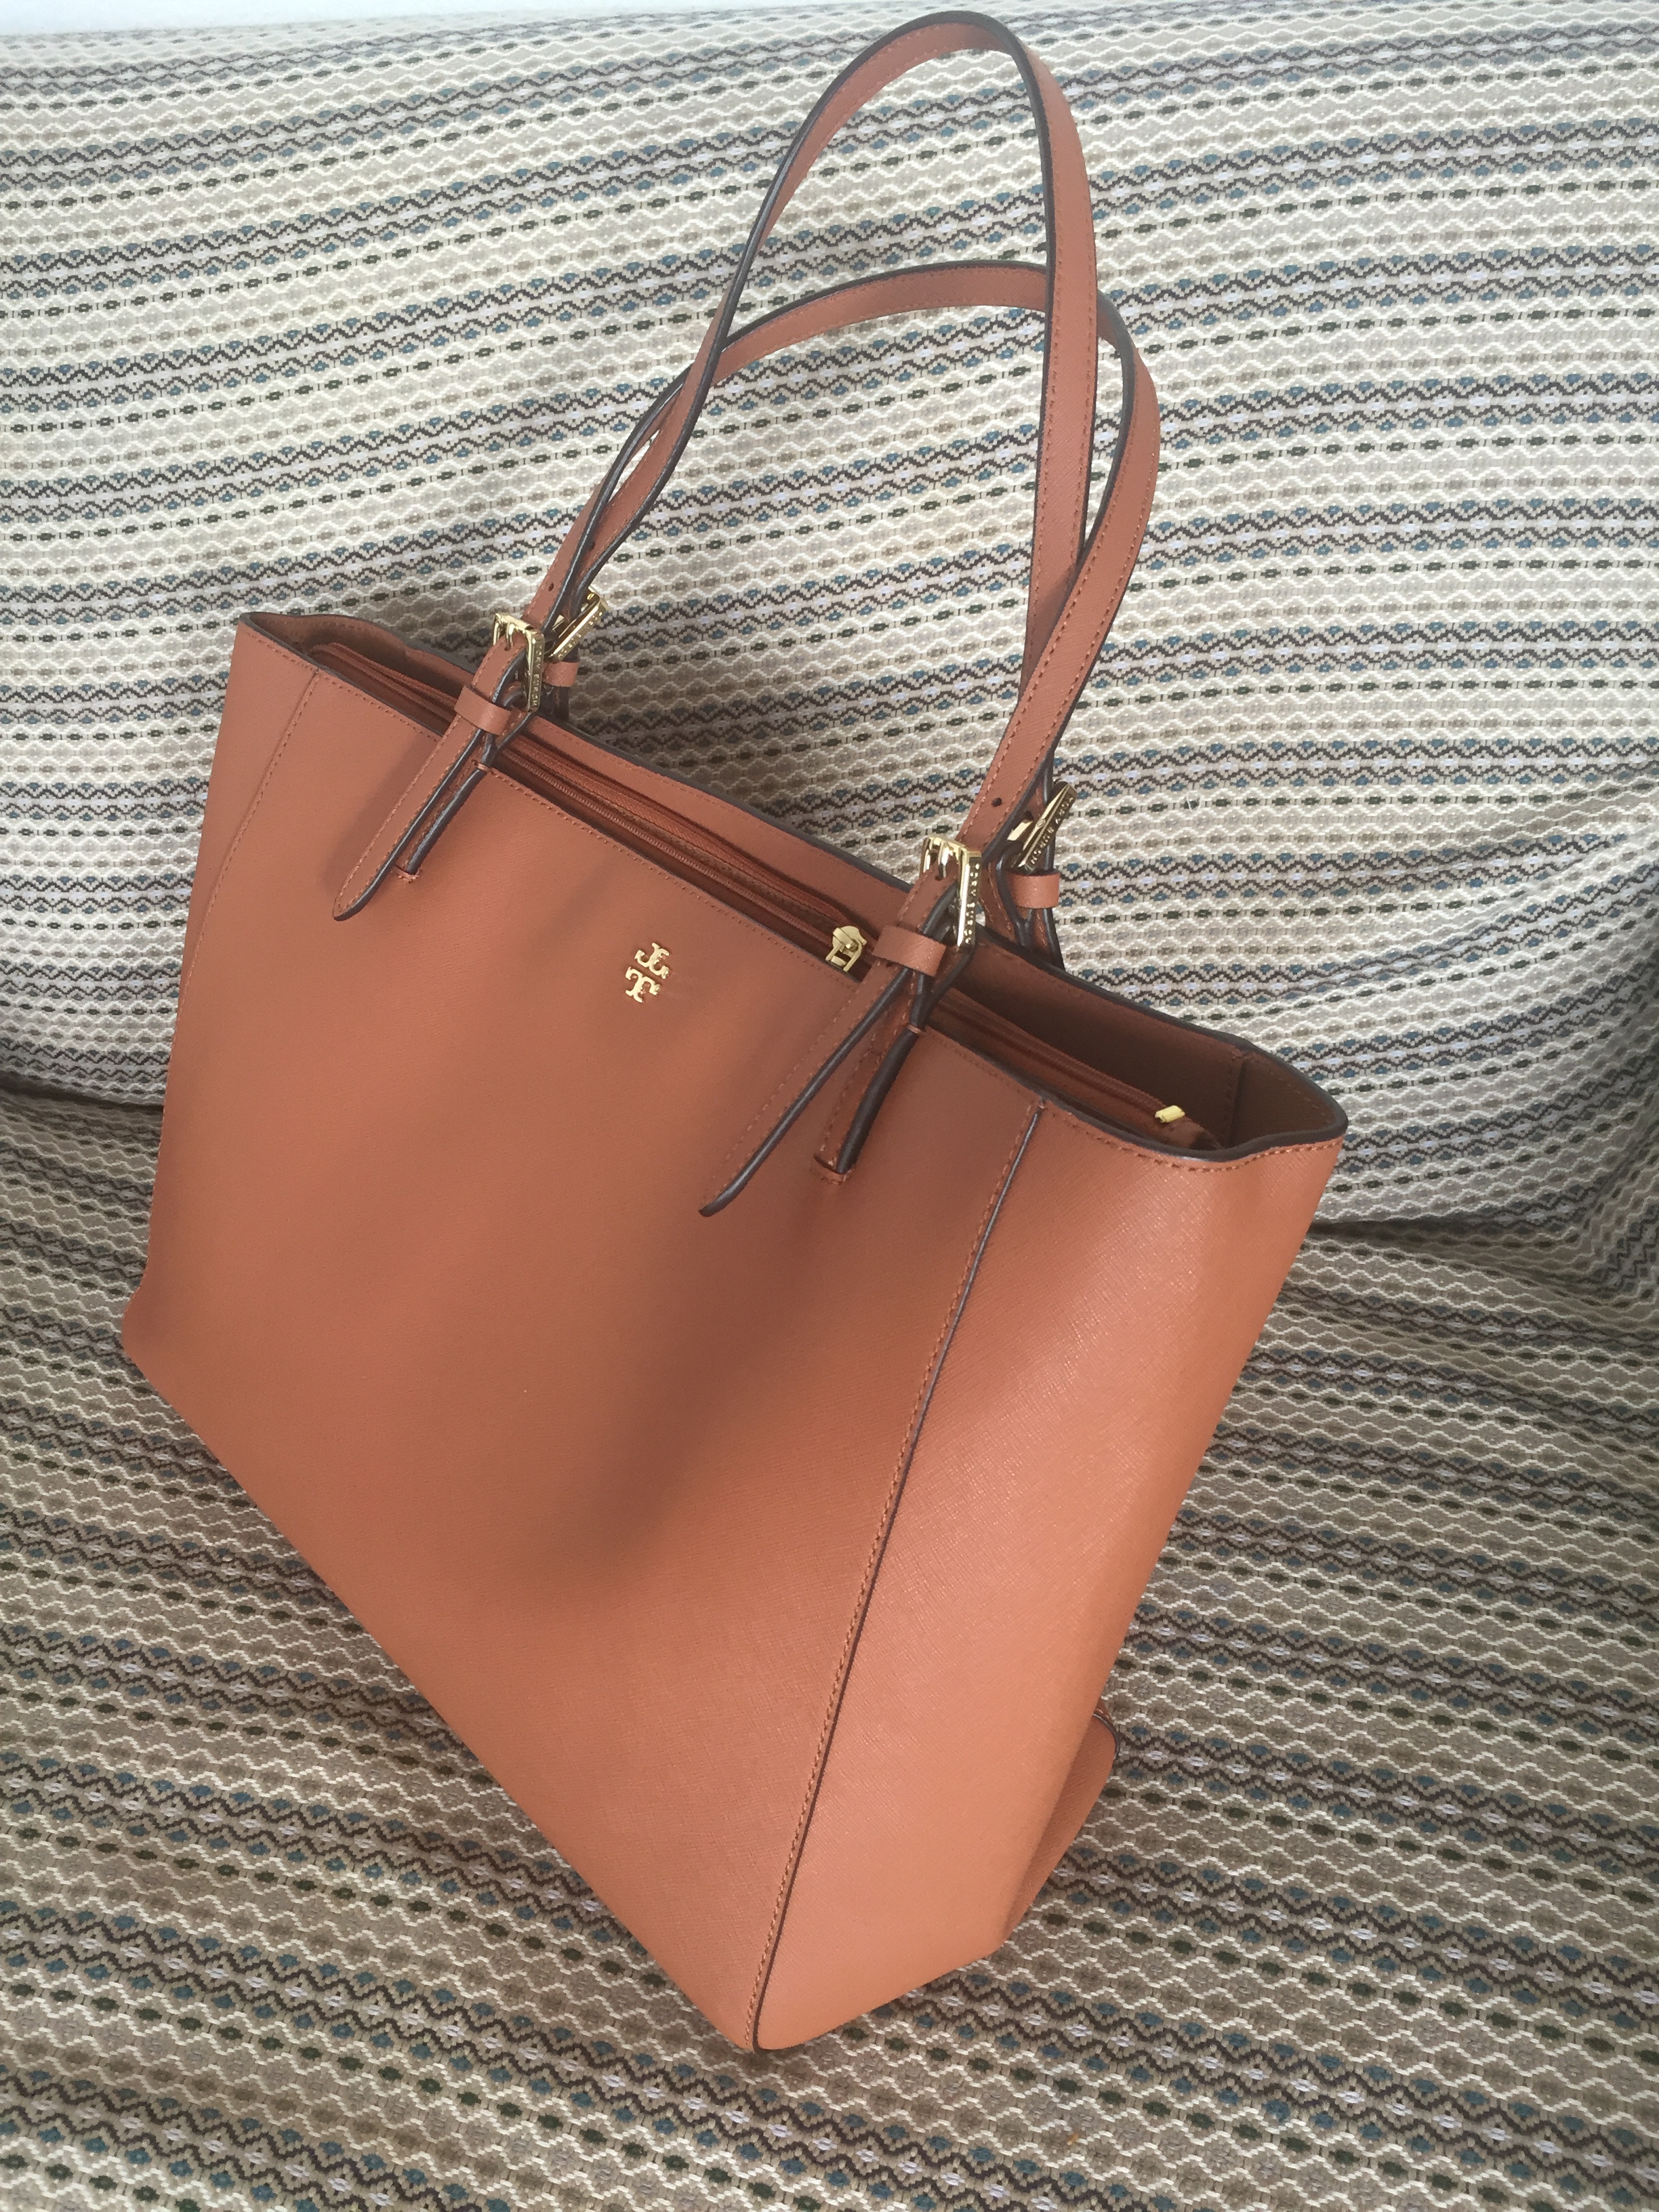 tory burch large york tote review 11 - The Double Take Girls